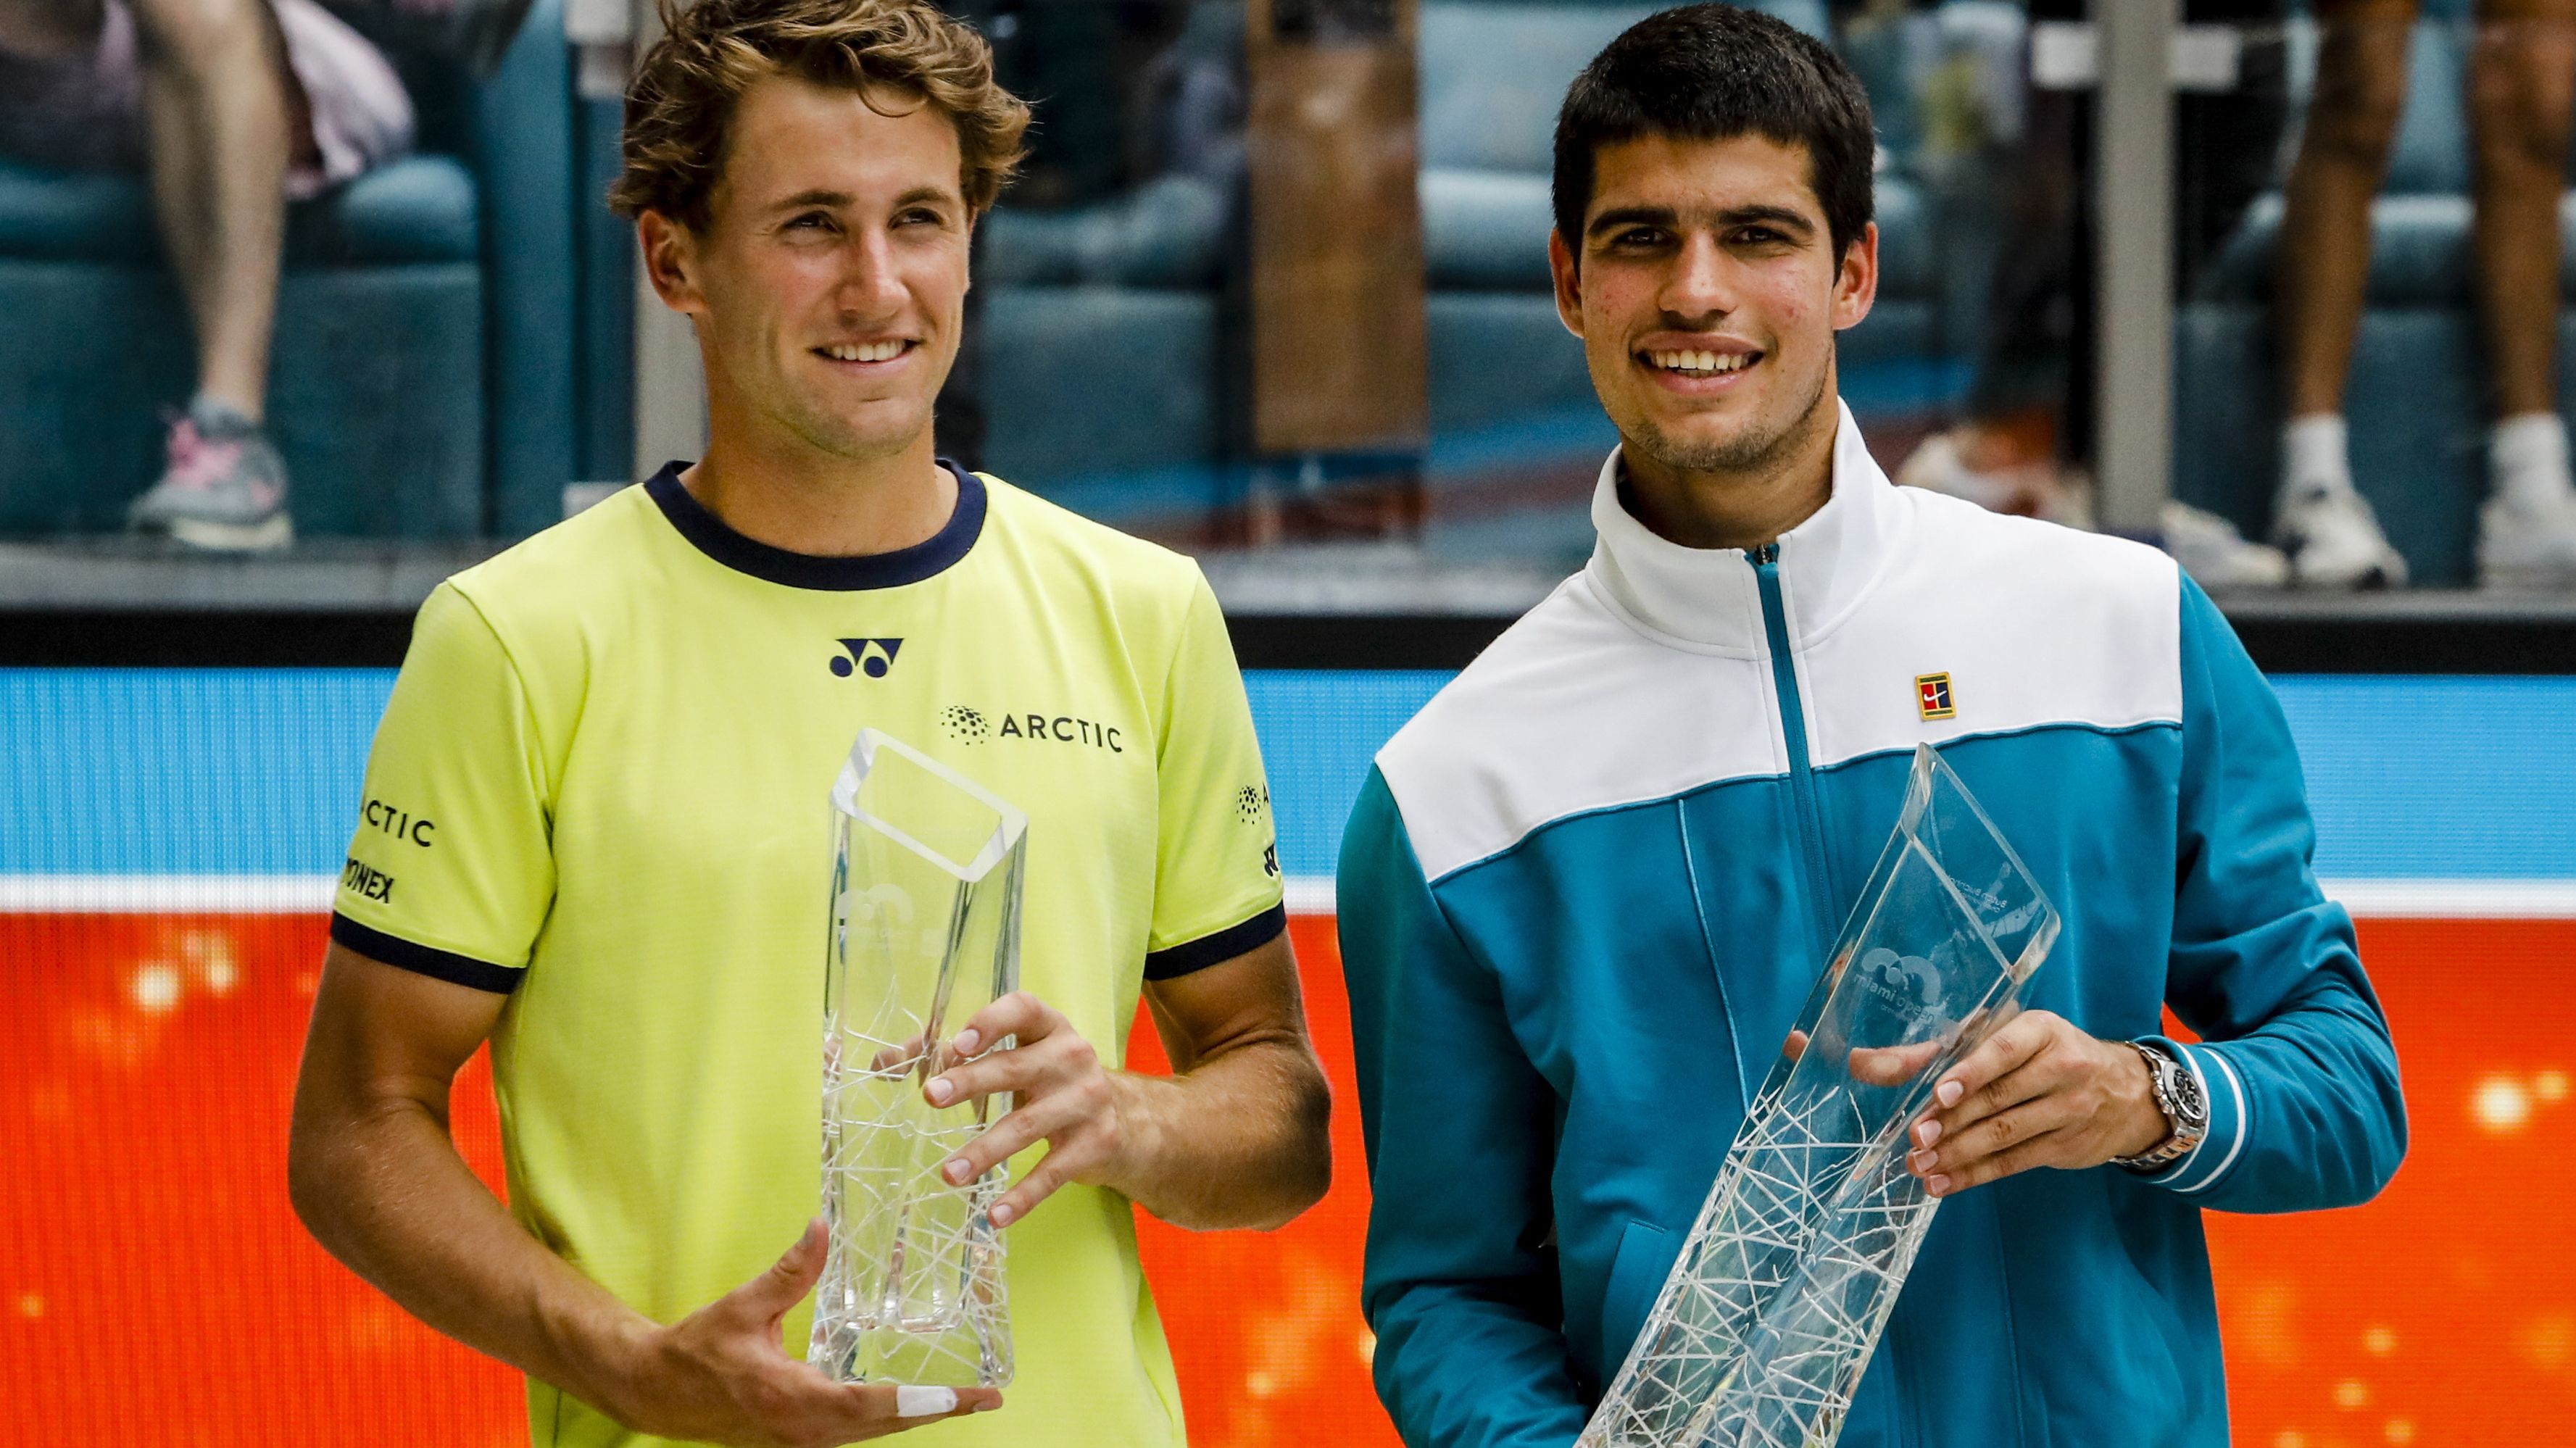 Carlos Alcaraz of Spain (right) and Casper Ruud of Norway hold their trophies after Men&#x27;s Singles final match at the Miami Open at Hard Rock Stadium on April 03, 2022 in Miami Gardens, Florida. (Photo by Eva Marie Uzcategui Trinkl/Anadolu Agency via Getty Images)